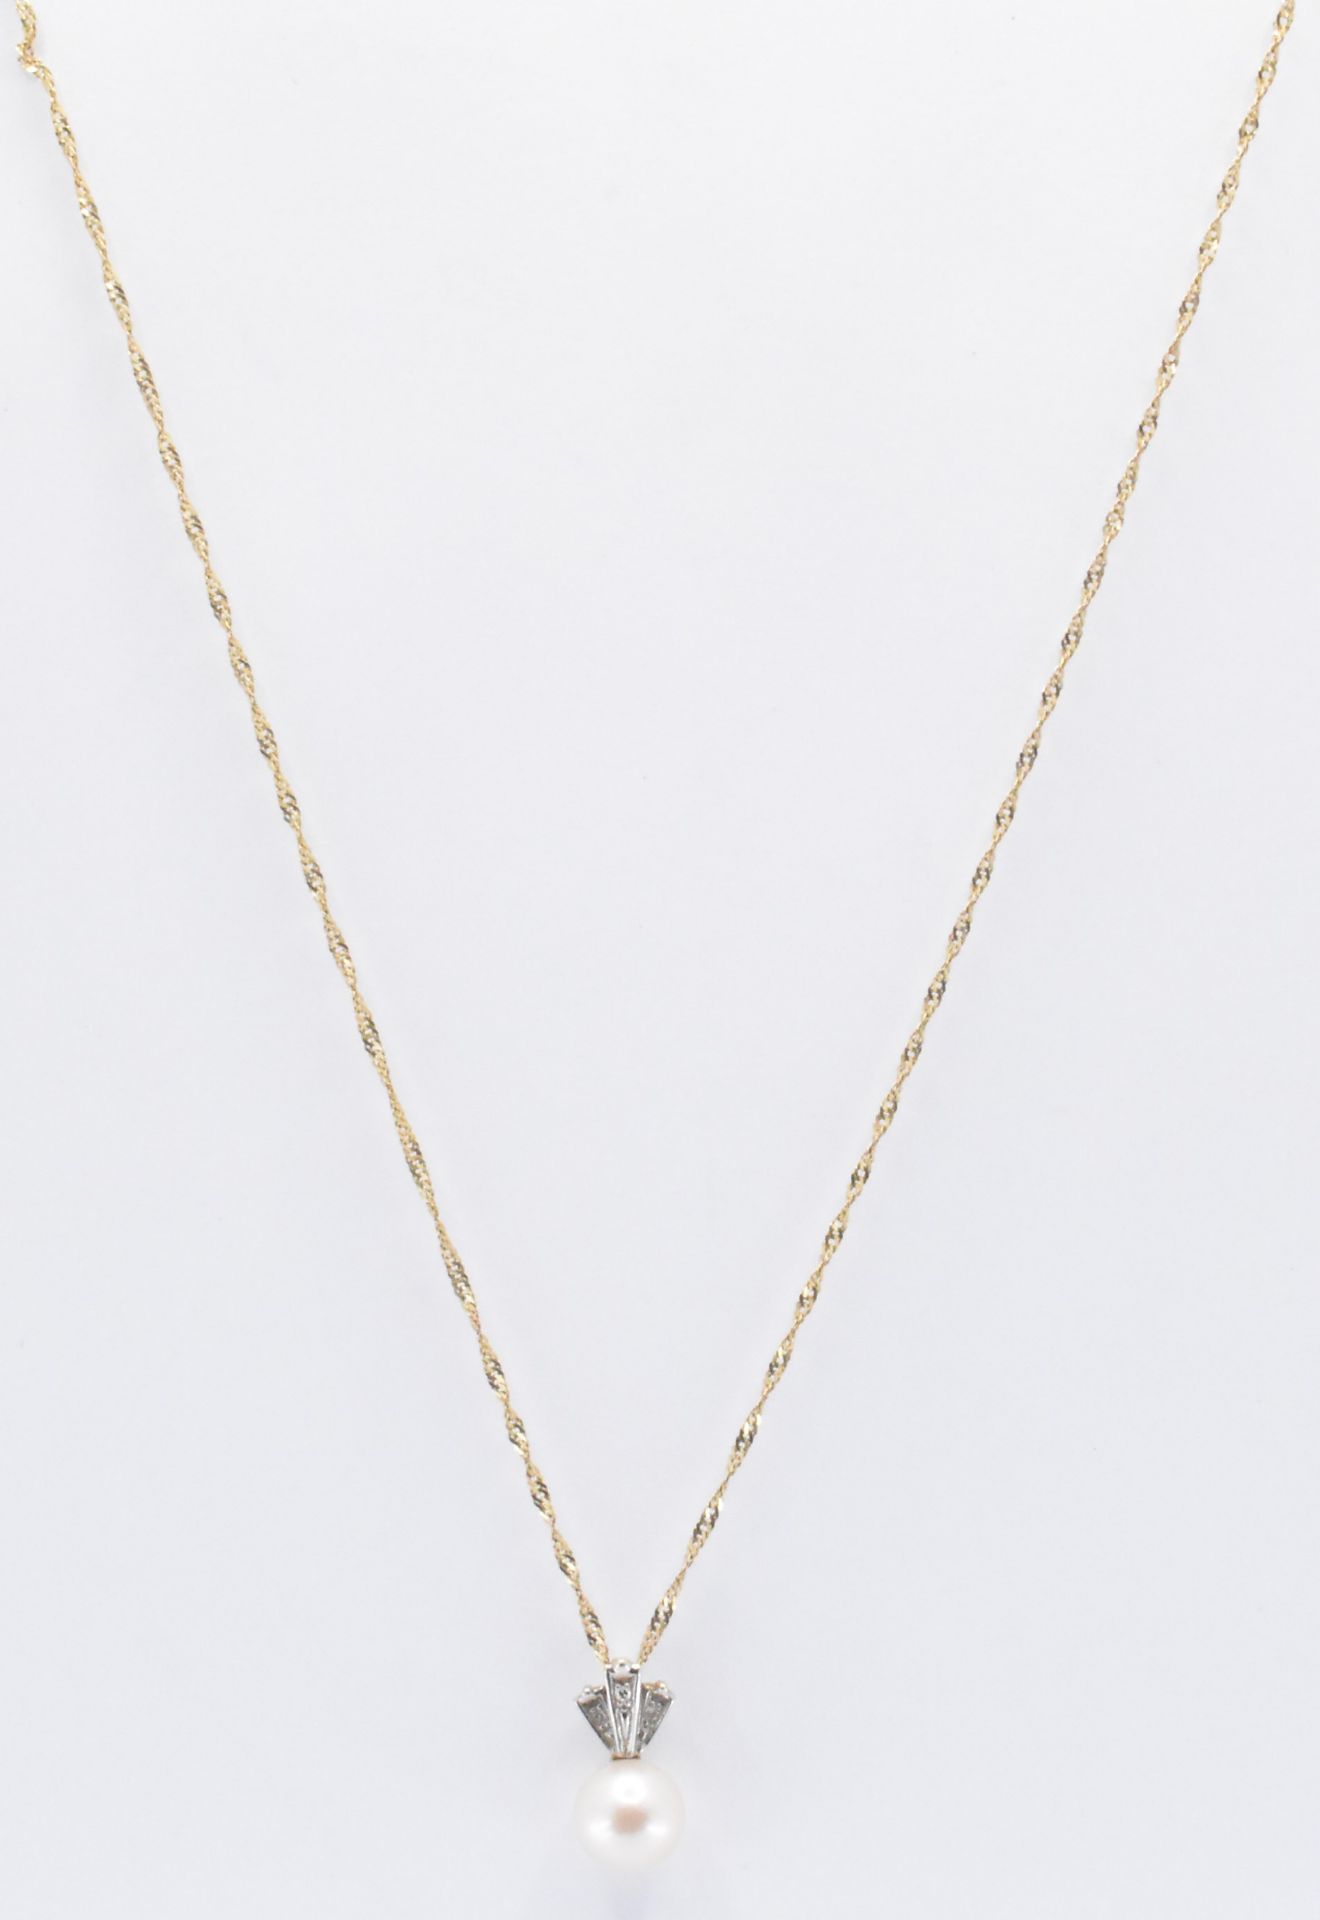 9CT GOLD PEARL AND DIAMOND PENDANT NECKLACE - Image 4 of 4